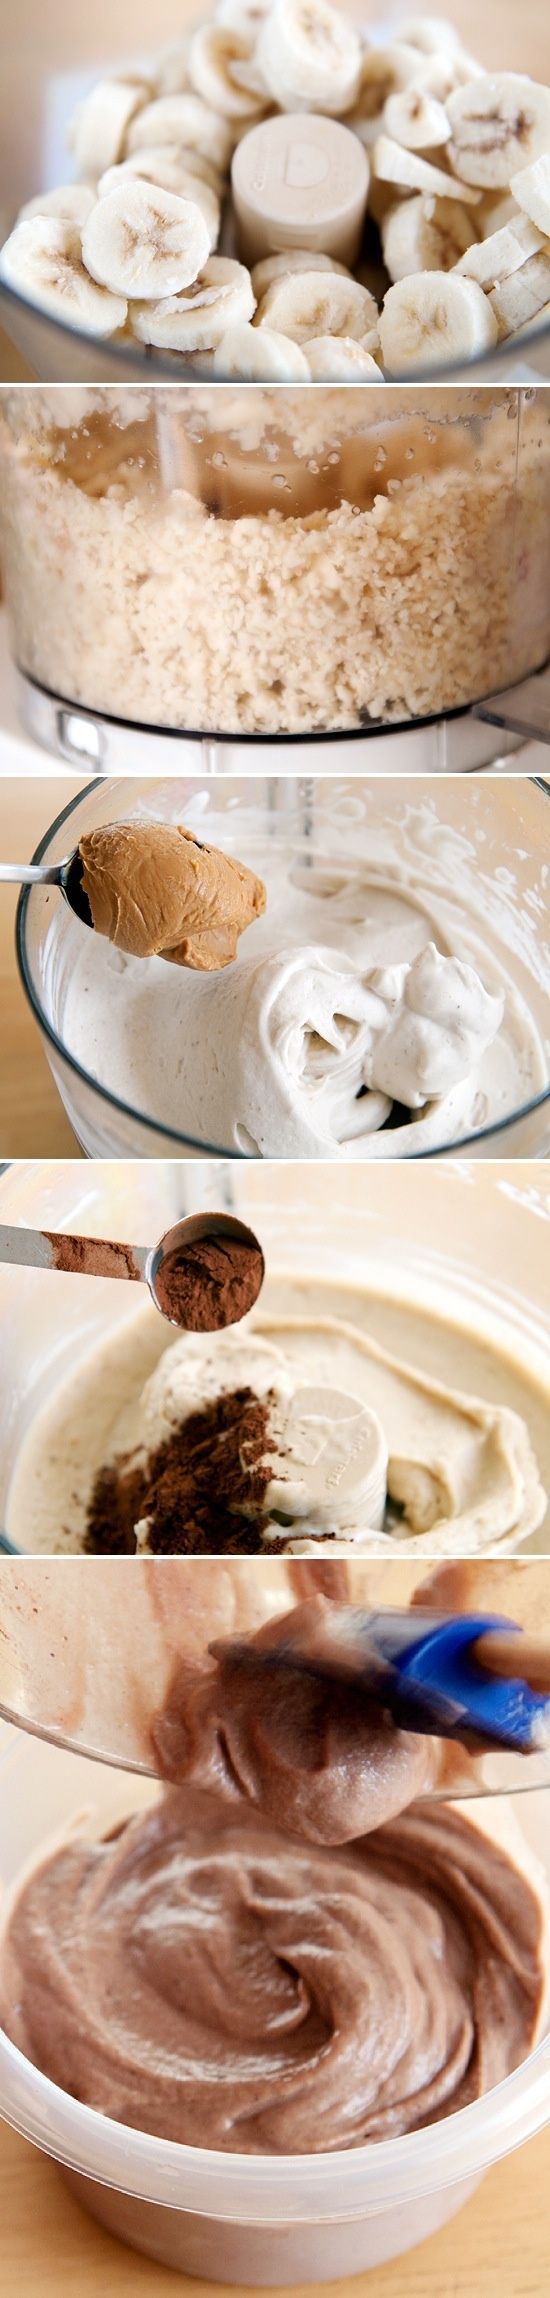 Guilt-Free Ice Cream. Just 3 ingredients: frozen bananas, peanut butter, and coc